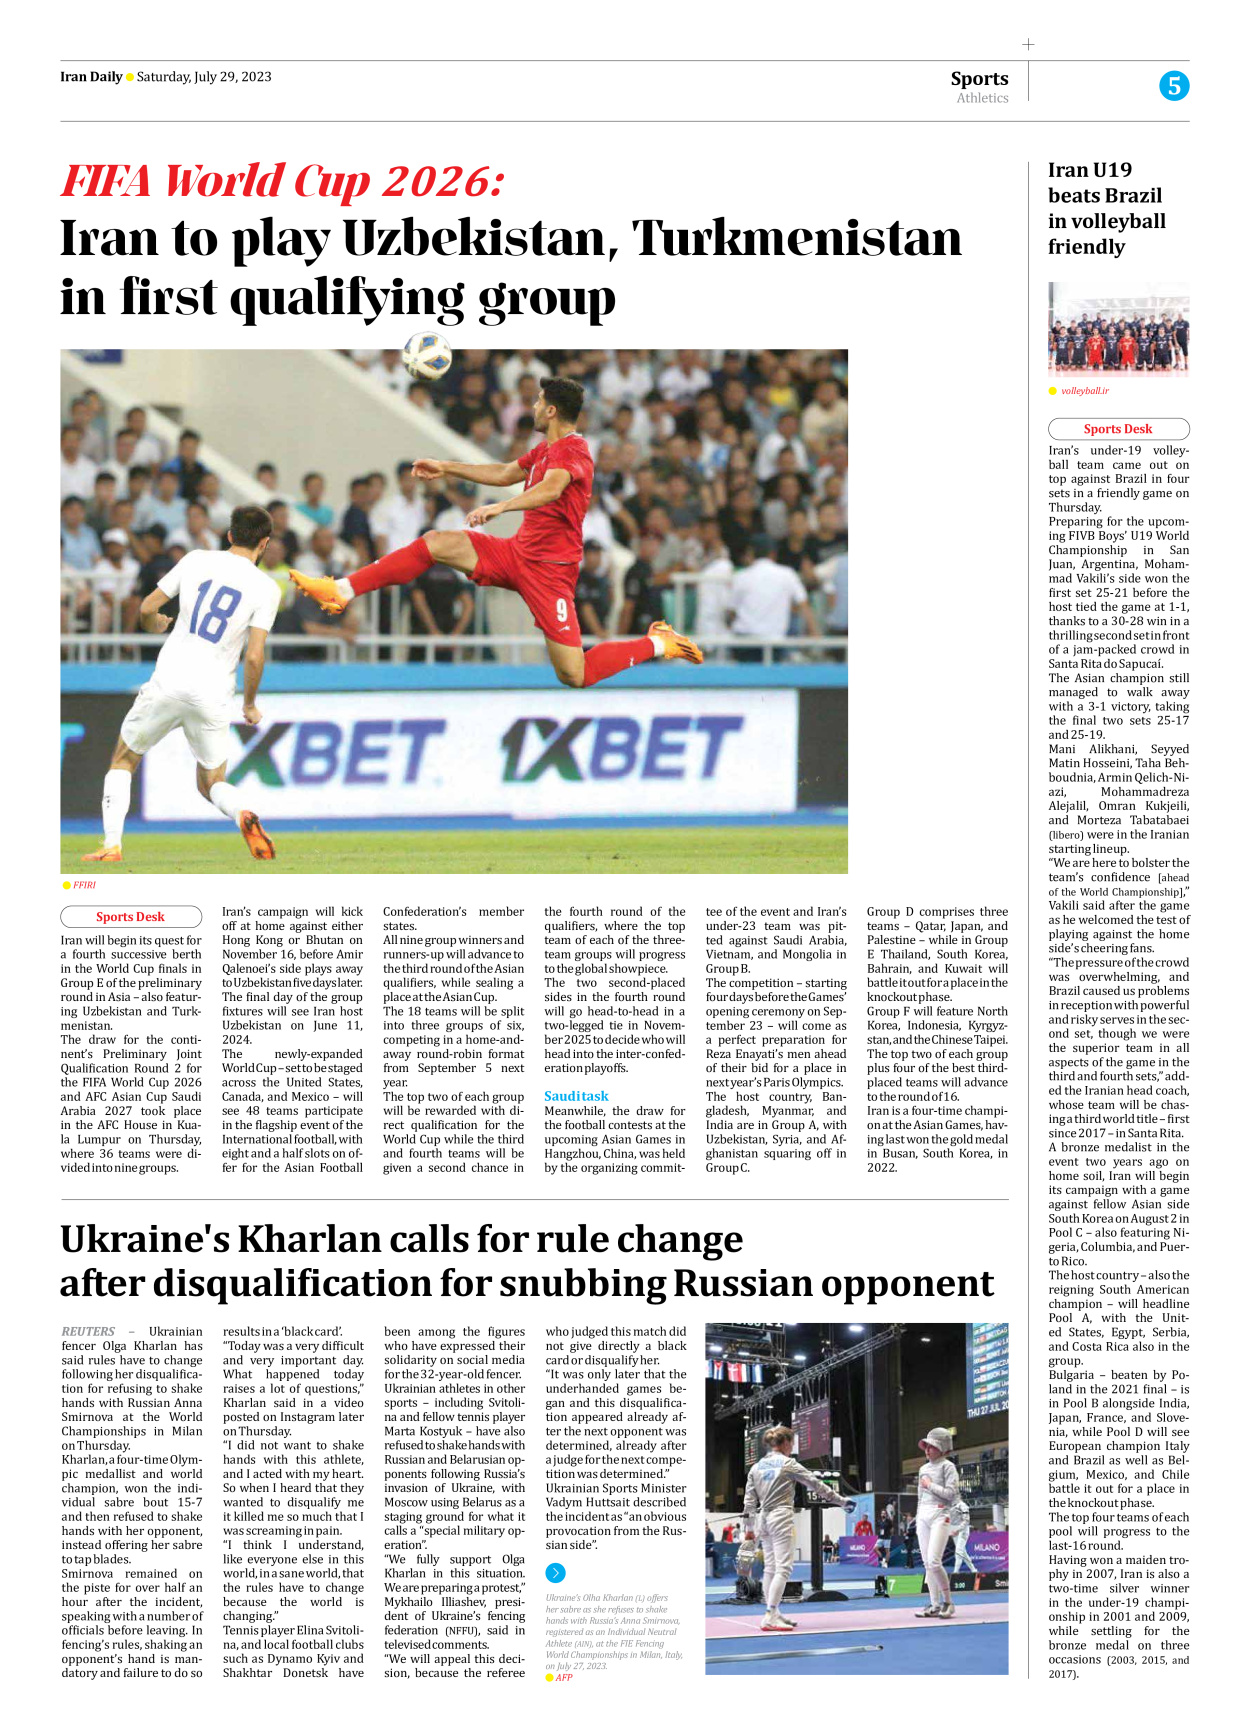 Iran Daily - Number Seven Thousand Three Hundred and Fifty - 29 July 2023 - Page 5